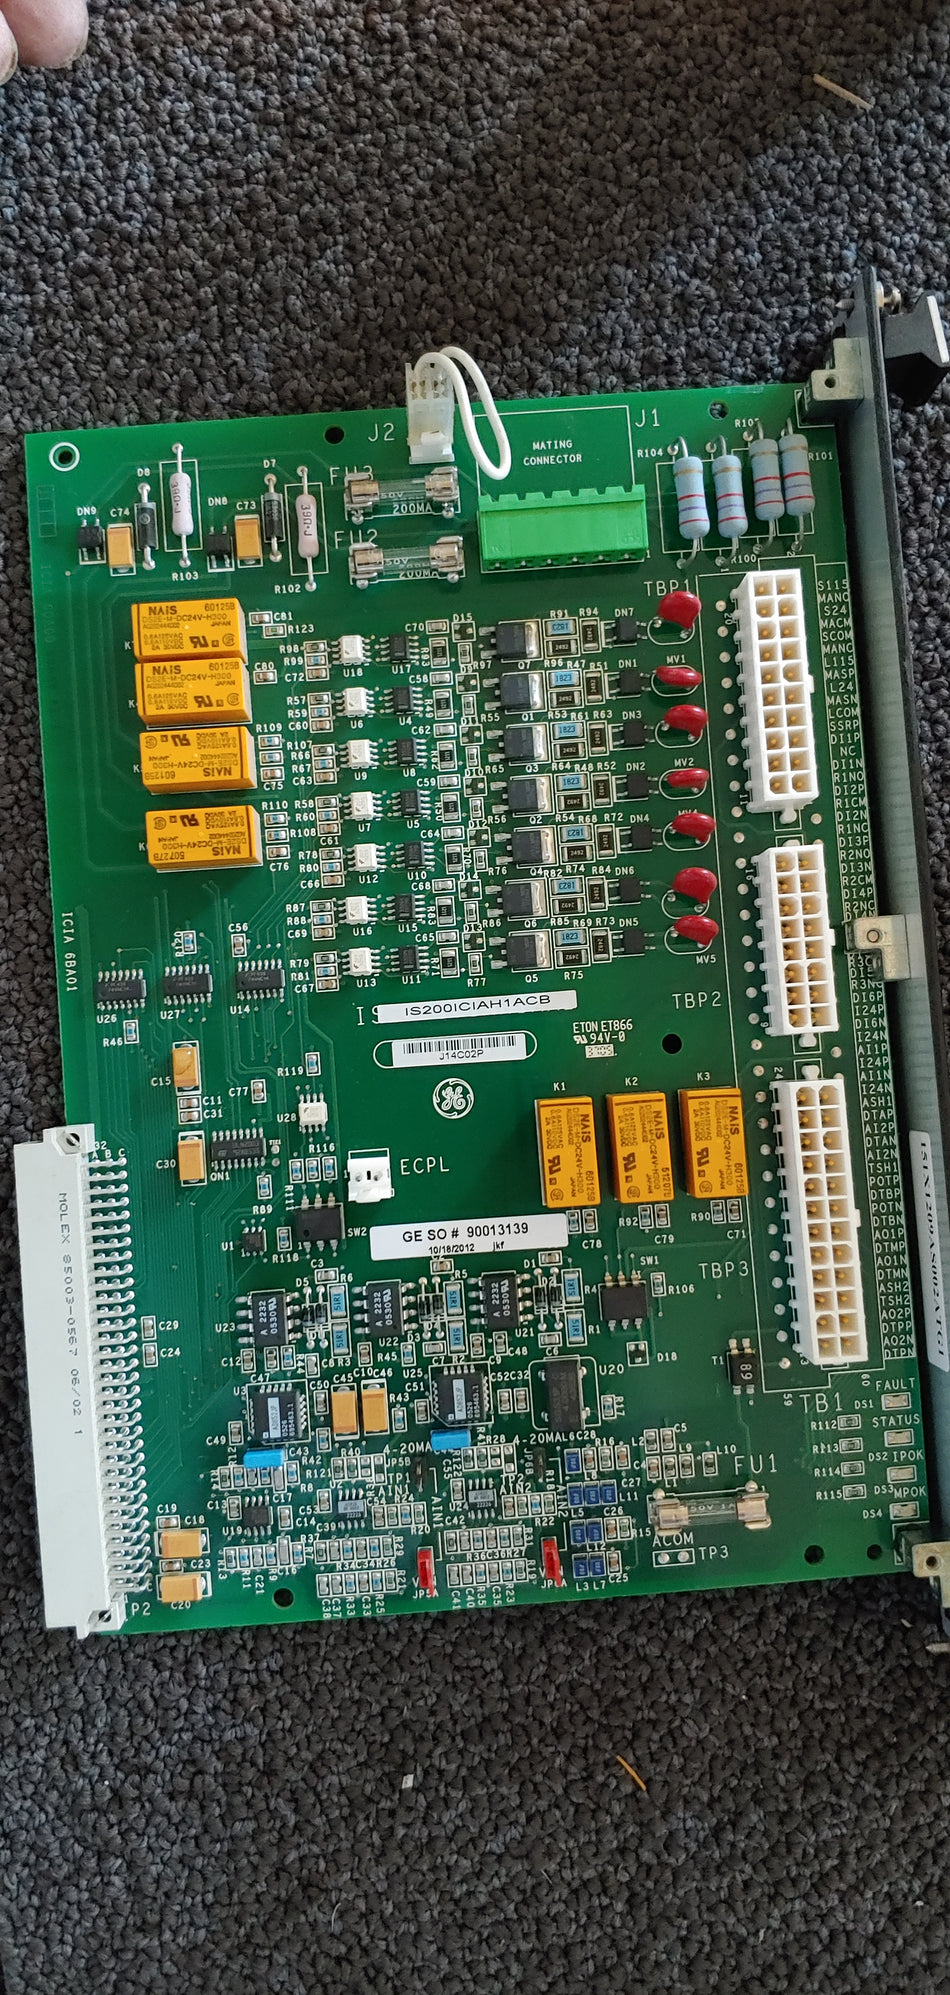 IS200ICIAH1ACB General Electric PC Board "Used"